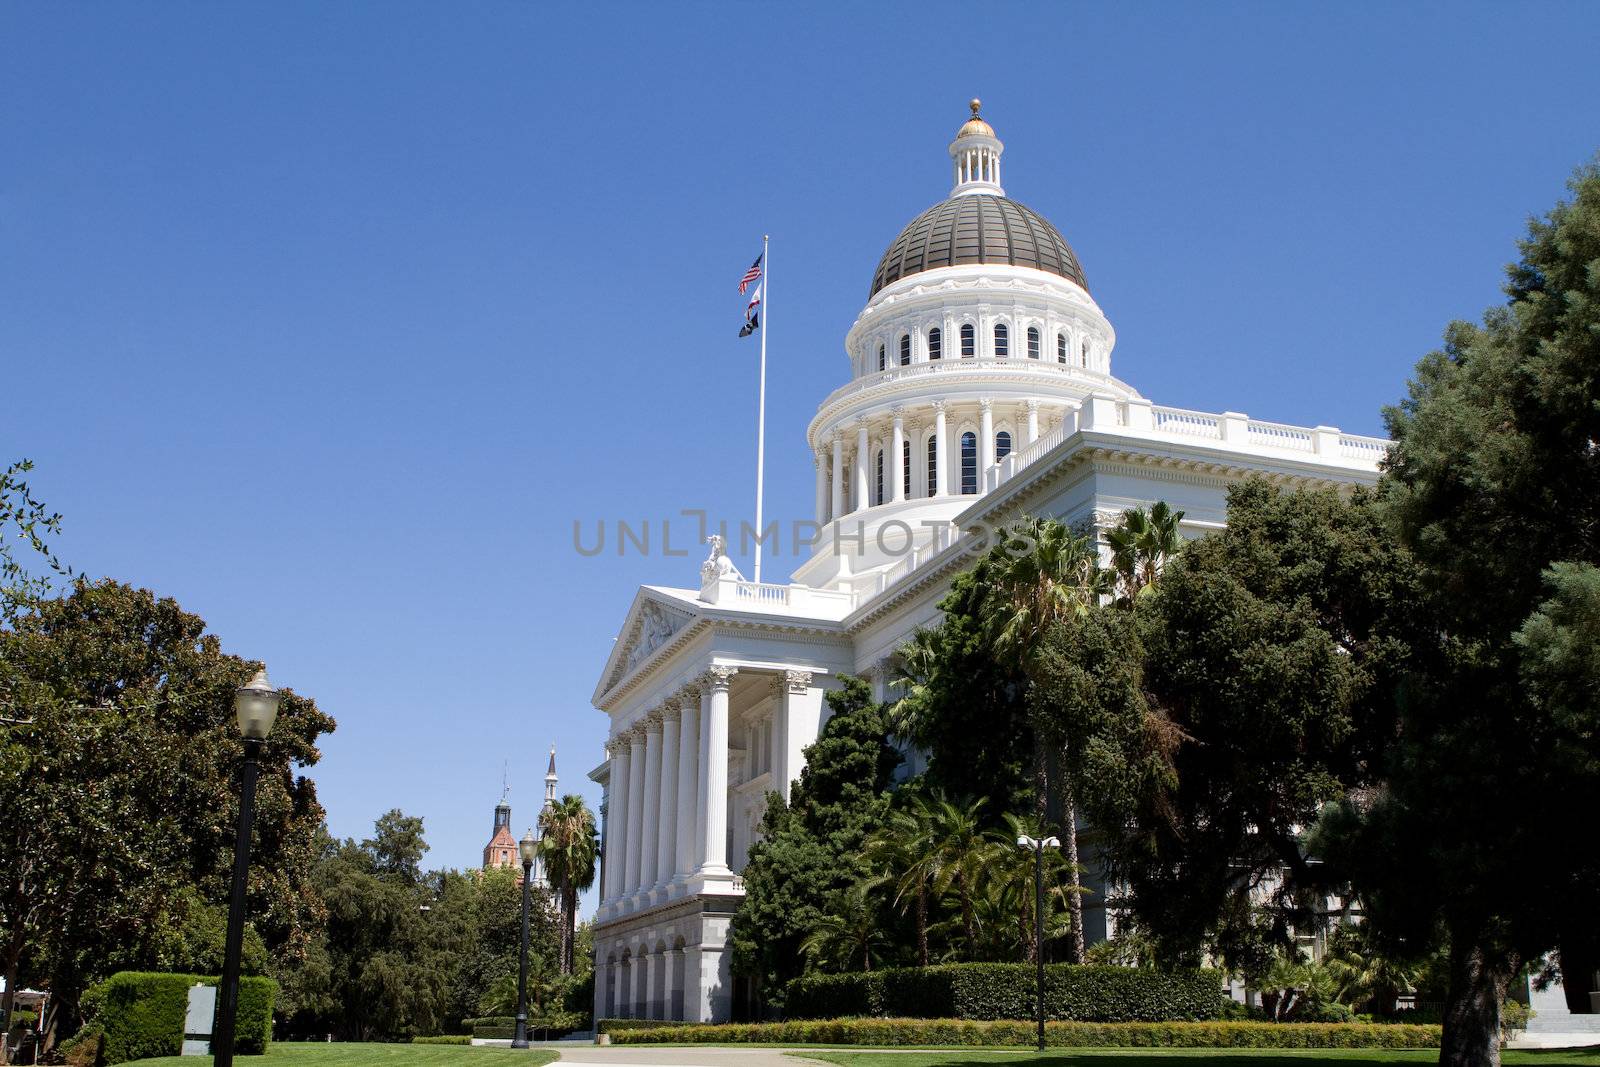 California state capitol and grounds with flags against a blue sky.